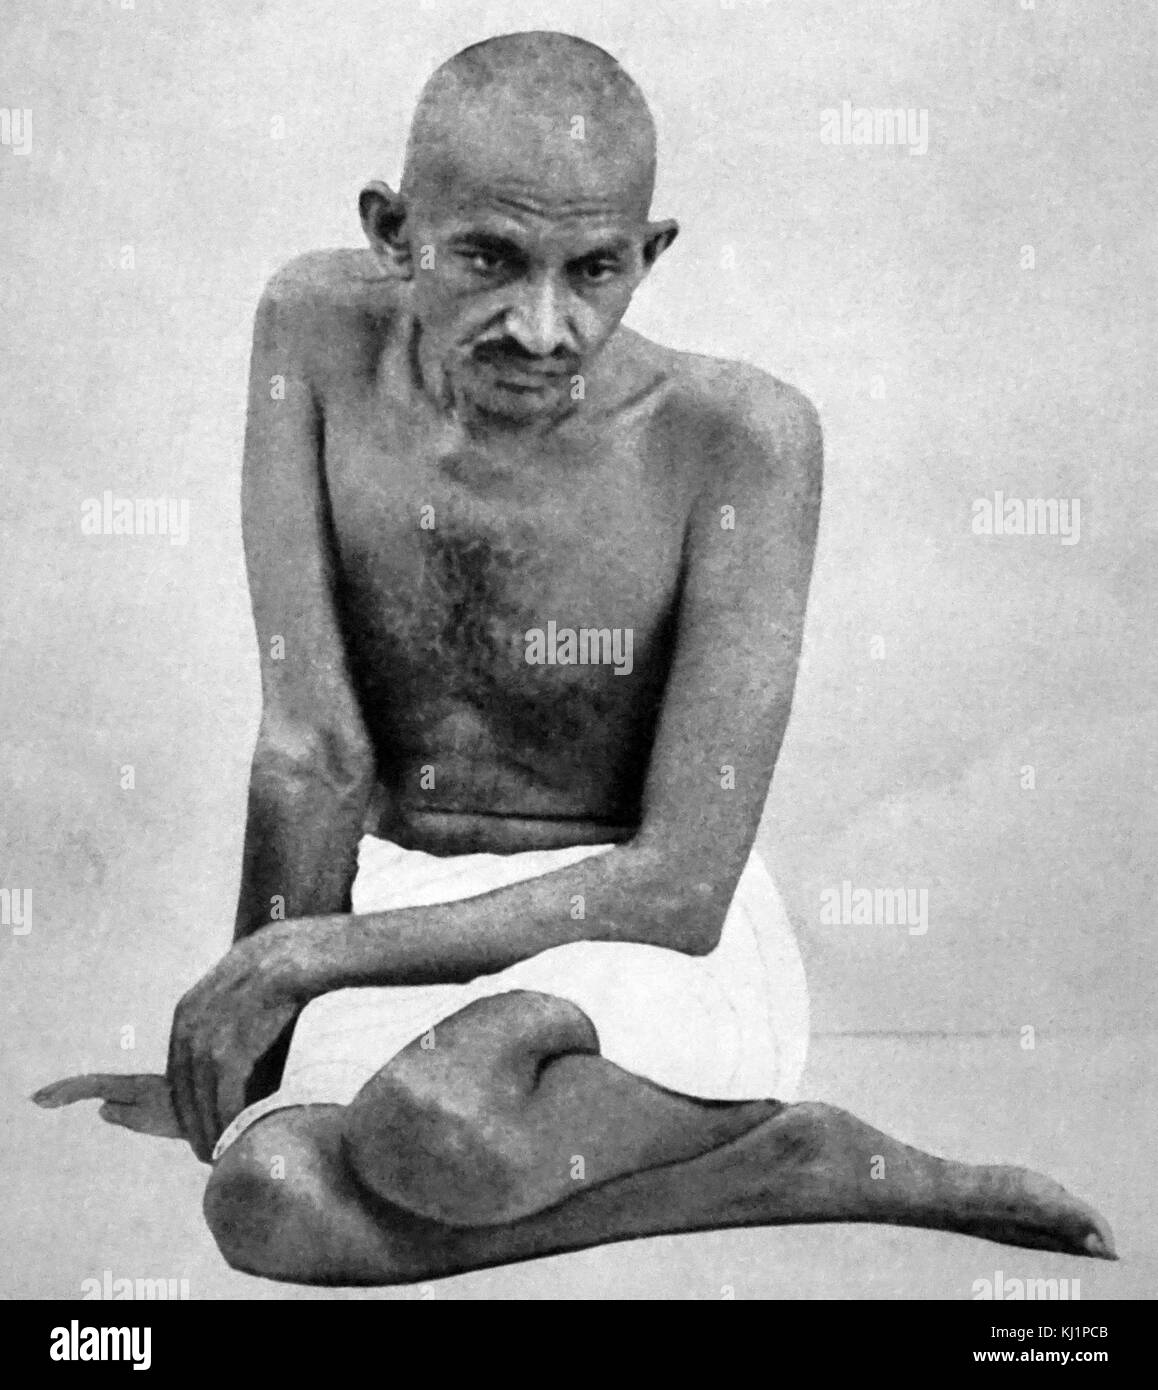 Mohandas Karamchand Gandhi 1869 – 1948), preeminent leader of the Indian independence movement in British-ruled India. Stock Photo